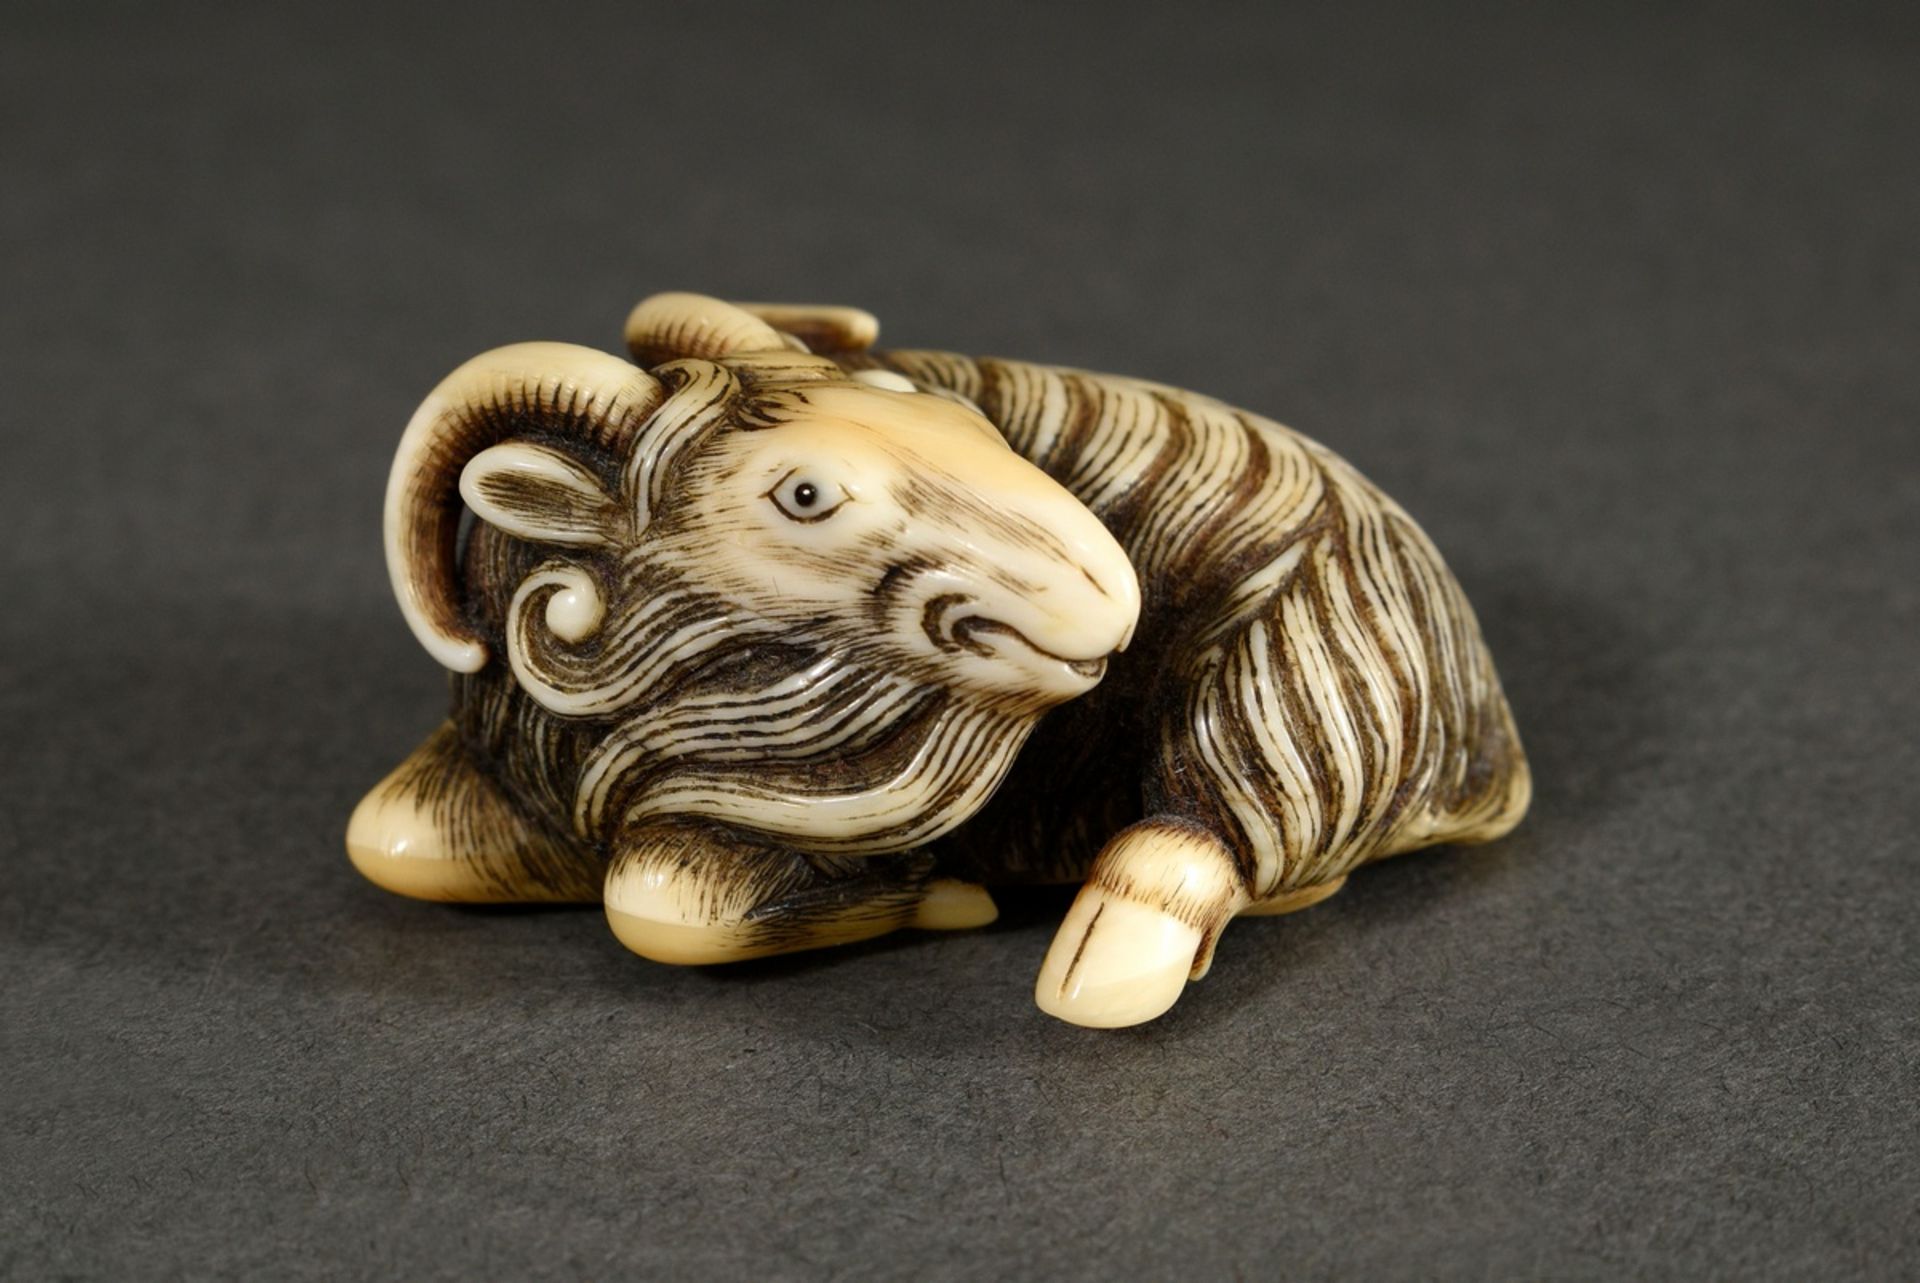 Ivory netsuke "Rolled-in mountain goat" with inlaid eyes of black horn and engraved fur, golden pat